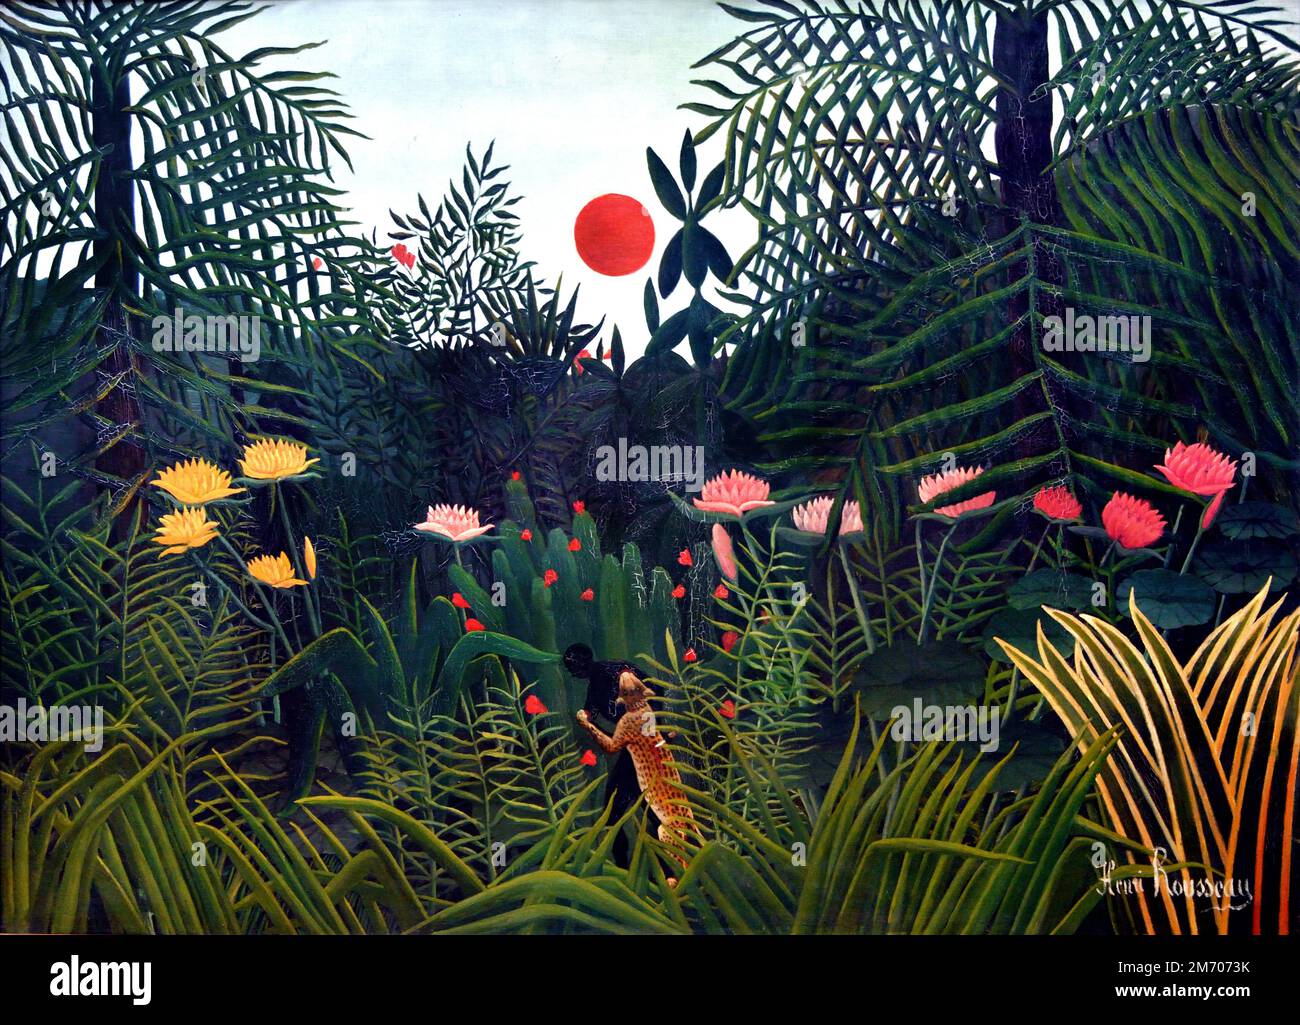 Jungle with Setting Sun 1910 Henri Rousseau 1844-1910 France French ( Le Douanier - The customs officer ) Stock Photo